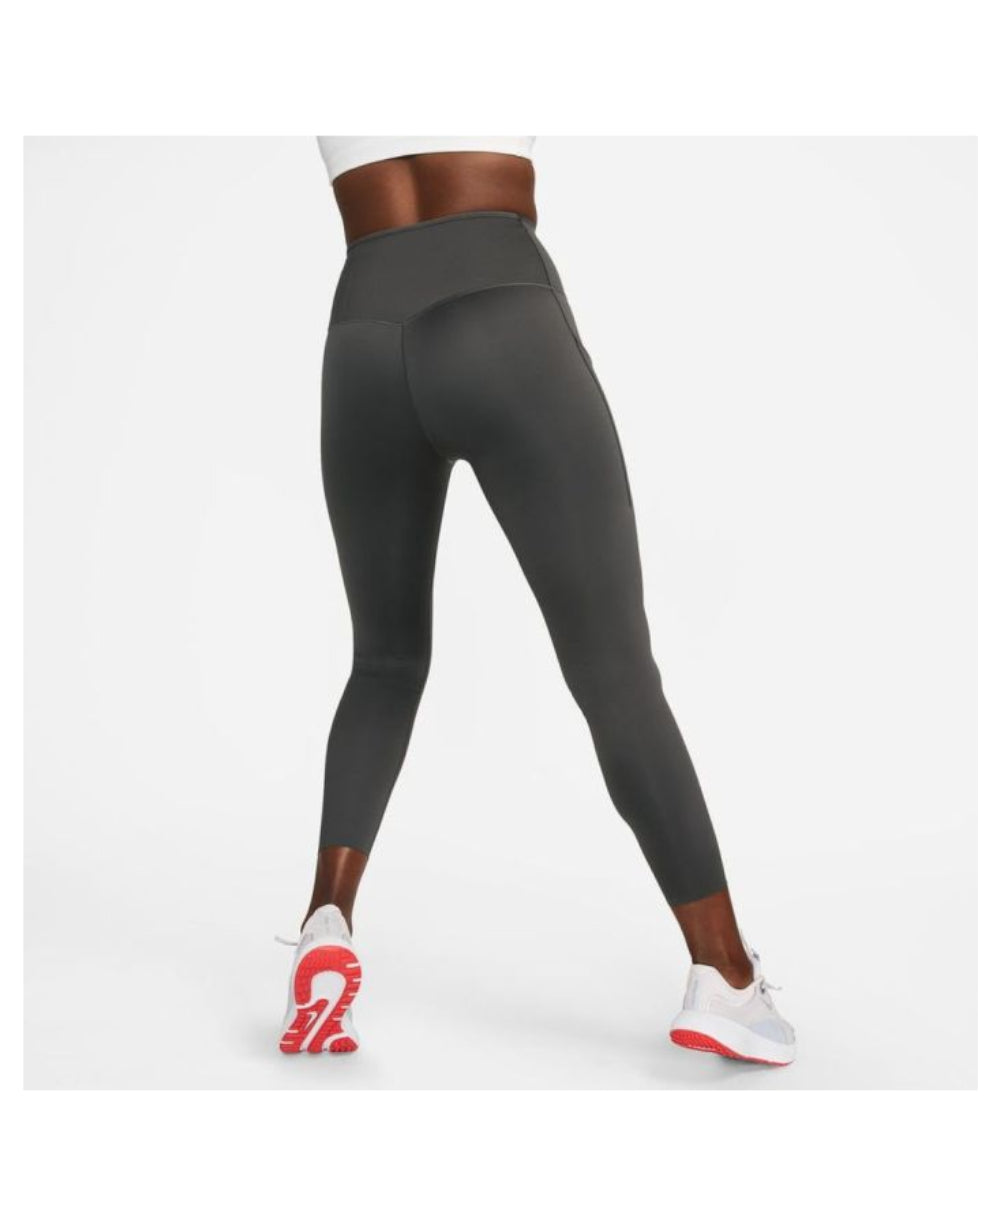 NIKE Go Firm-Support High-Waisted 7/8 moteriškos tamprės